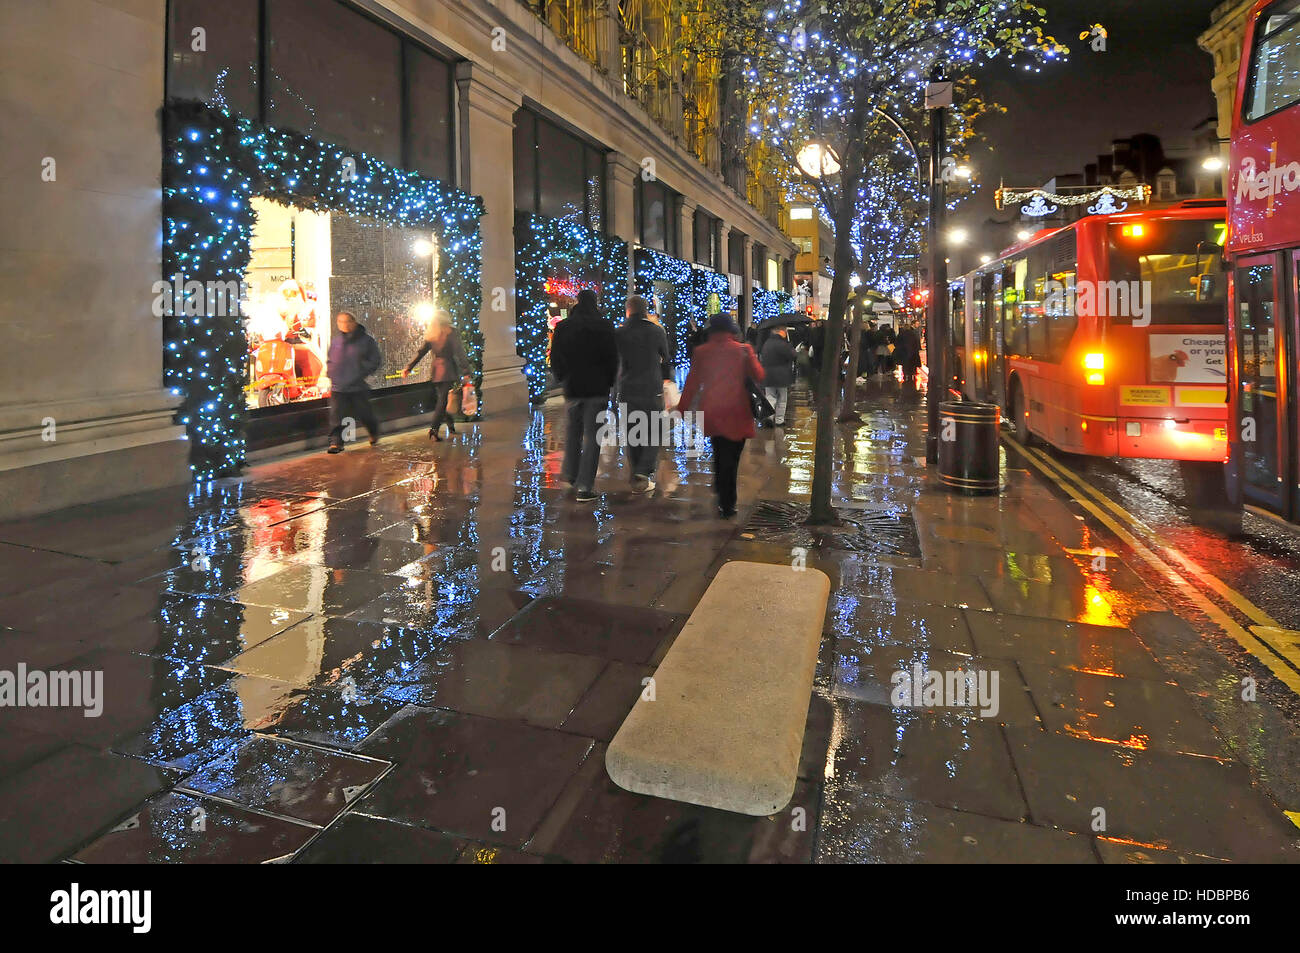 Rainy day in London UK Oxford street with Xmas shoppers and Christmas decorations outside Selfridges West End department store  just stopped raining Stock Photo